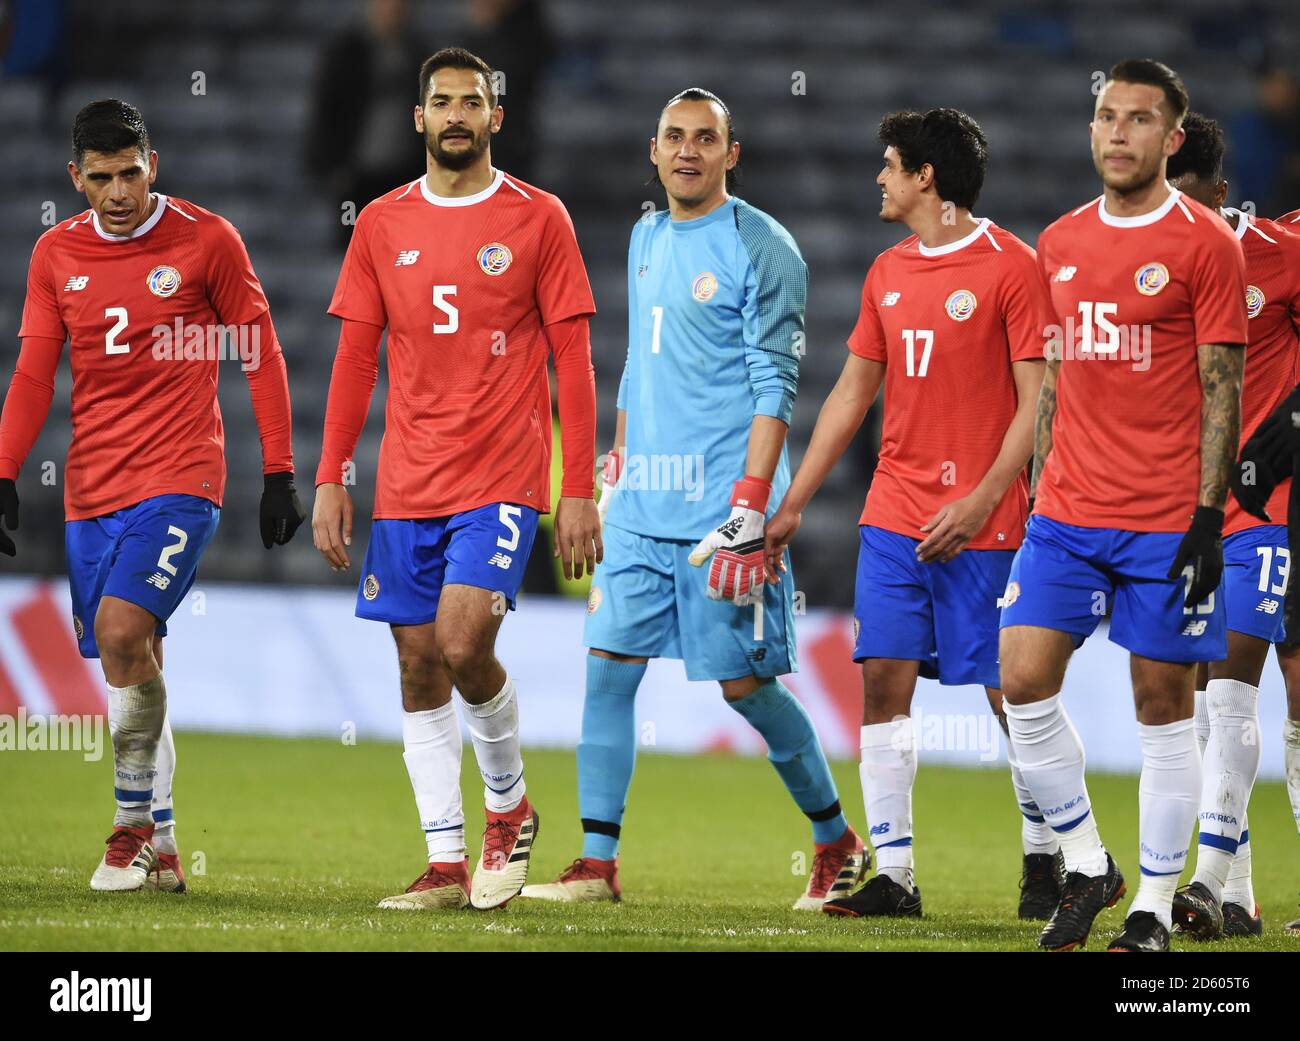 L to R: Costa Rica's Johnny Acosta, Celso Borges, Keilor Navas, Yeltsin Tejeda, and Francisco Calvo after the international friendly match at Hampden Park, Glasgow. RESTRICTIONS: Use subject to restrictions. Editorial use only. Commercial use only with prior written consent of the Scottish FA. Stock Photo